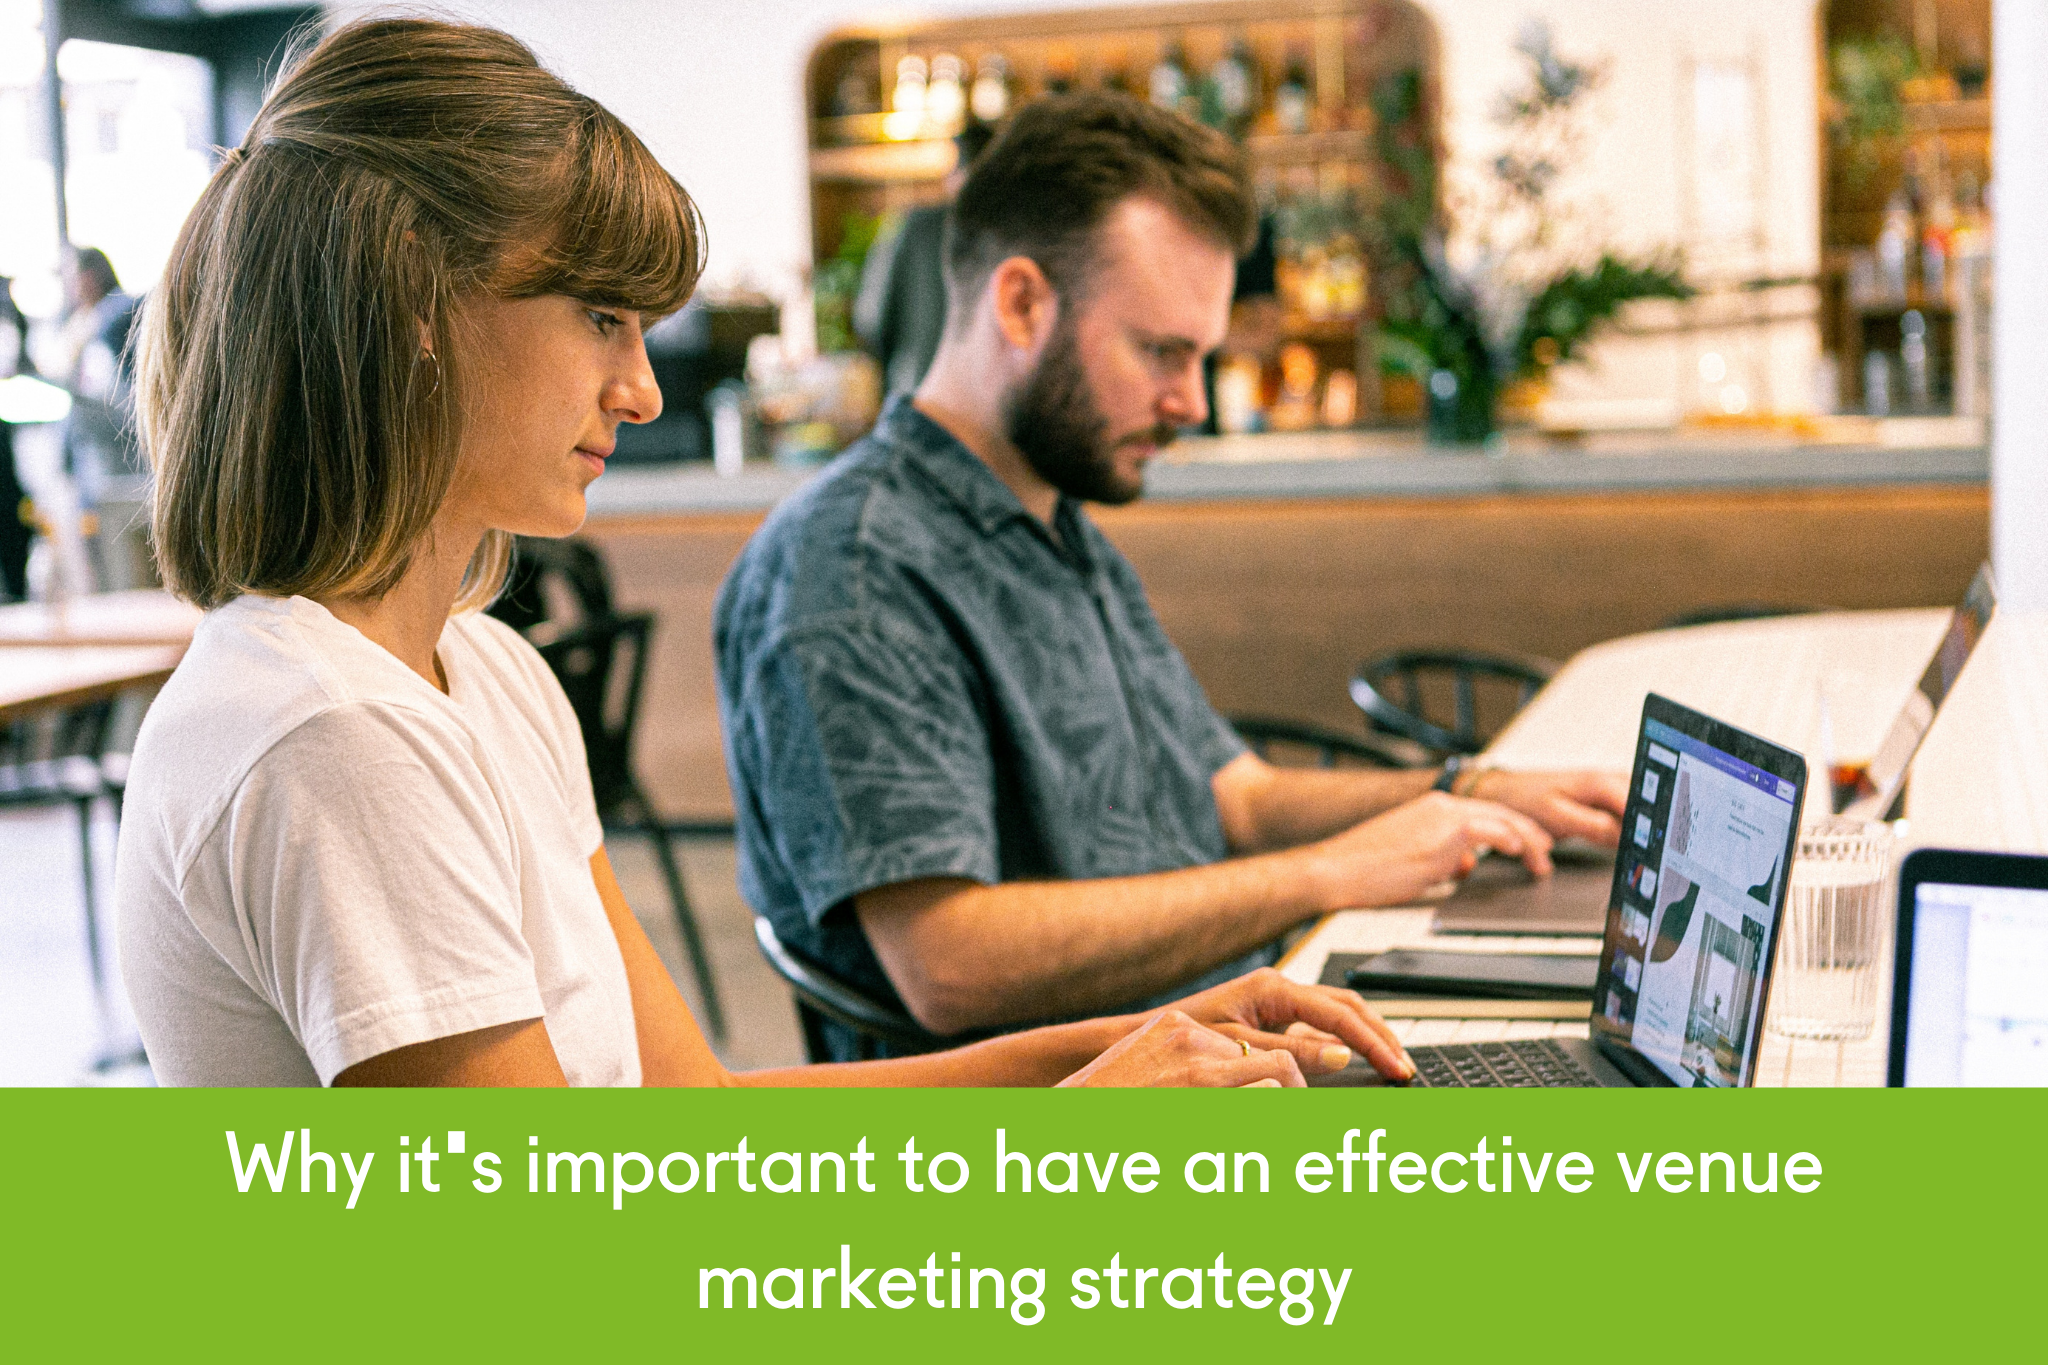 Why its important to have an effective venue marketing strategy